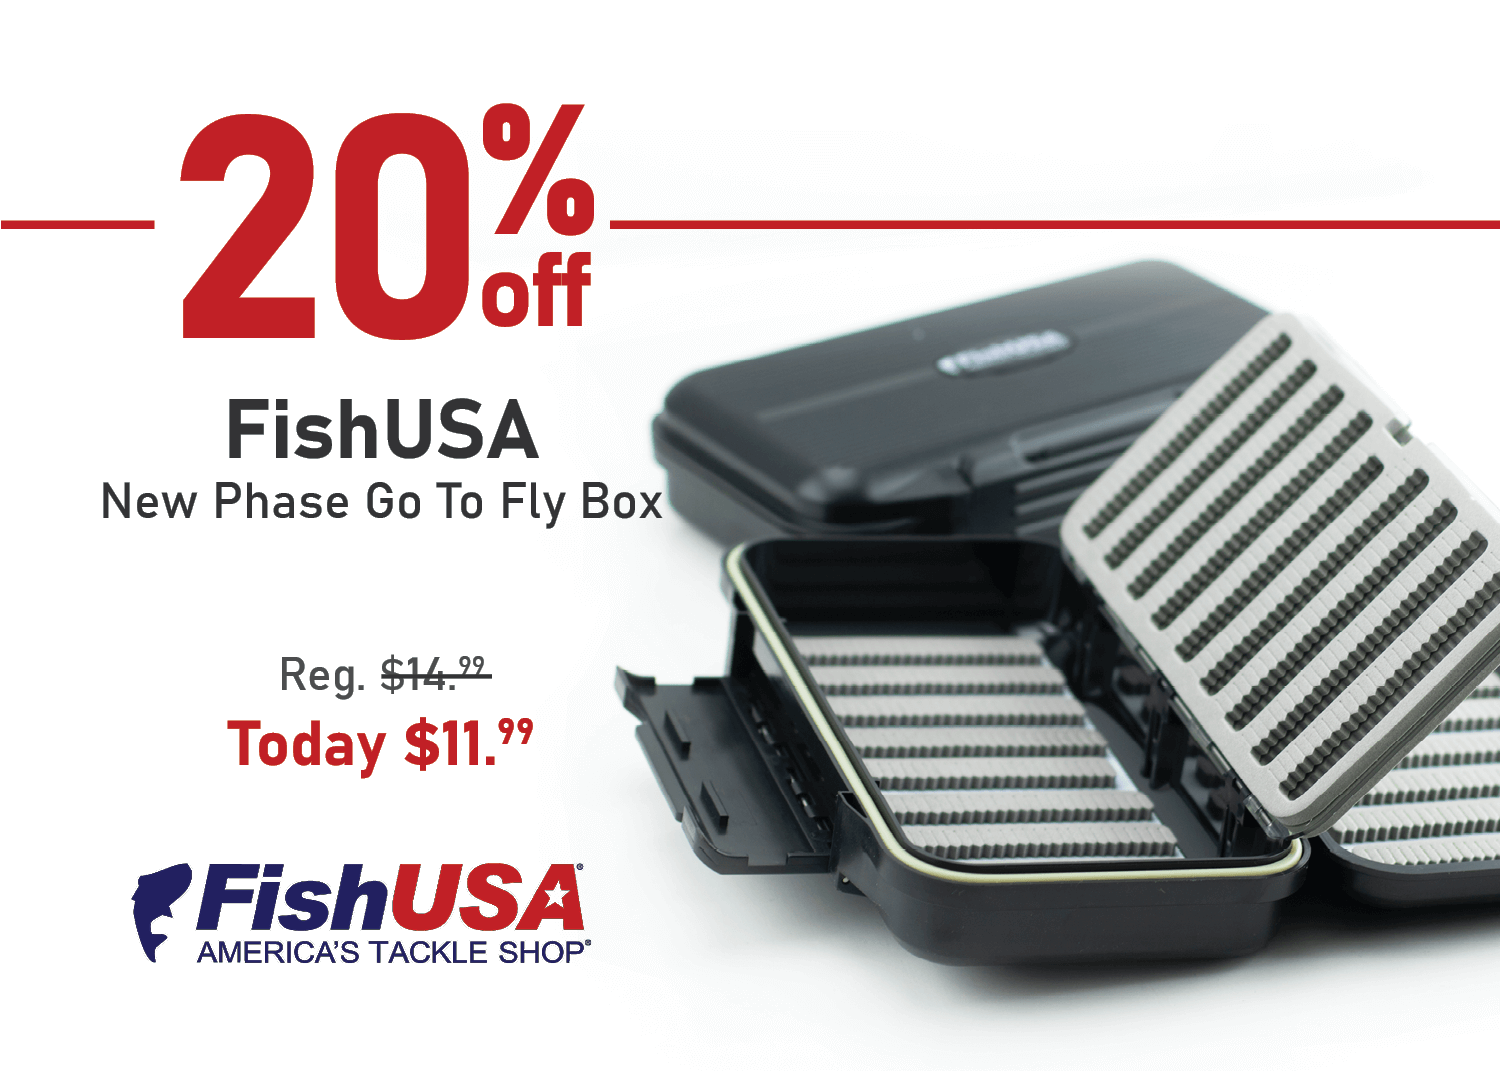 Save 20% on the FishUSA New Phase Go To Fly Box